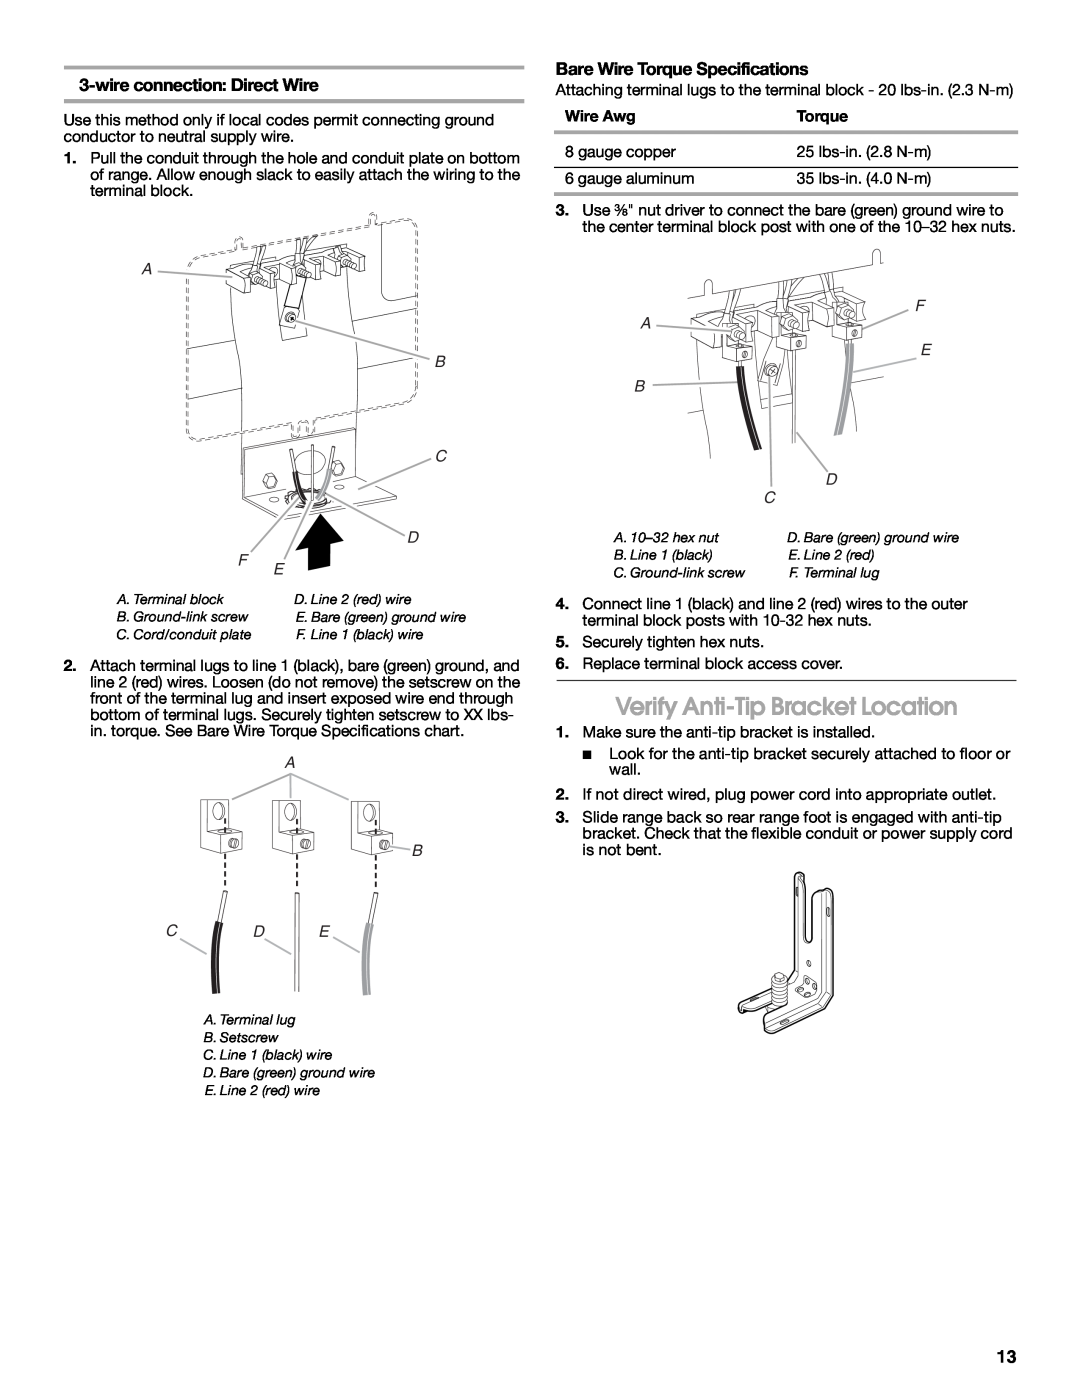 Whirlpool W10270322A Verify Anti-TipBracket Location, wireconnection Direct Wire, Bare Wire Torque Specifications 